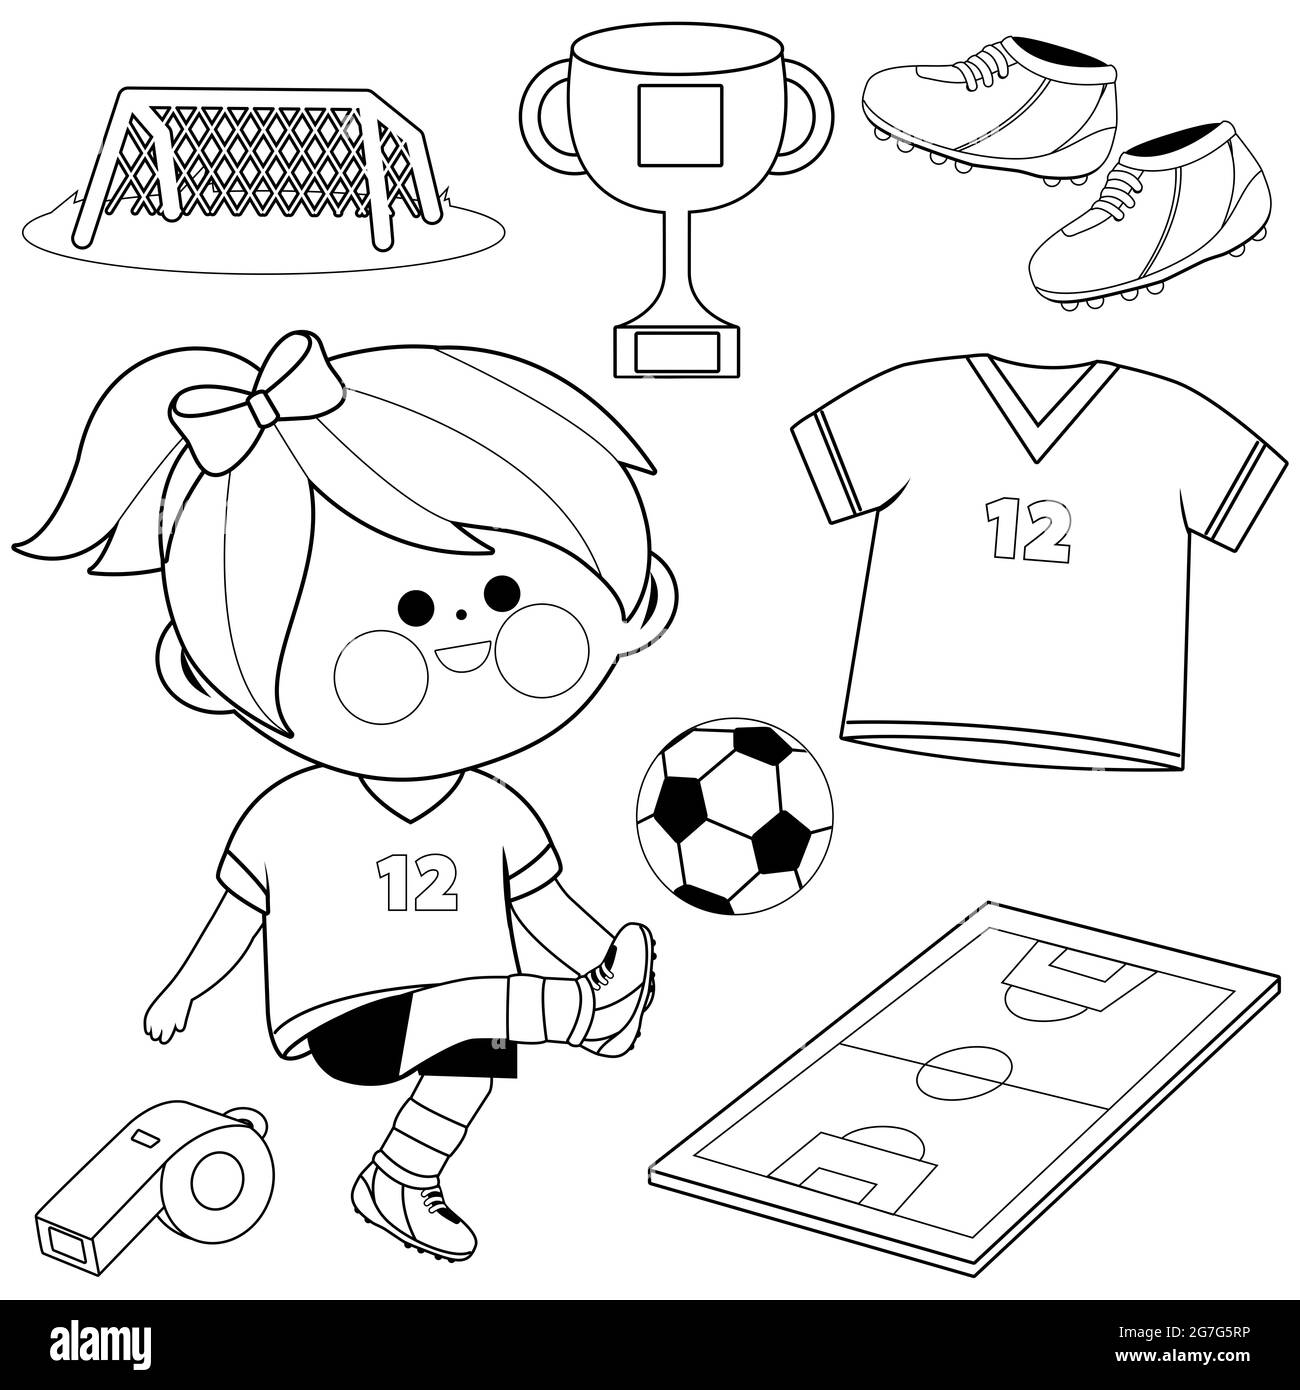 Little girl playing soccer. Black and white coloring page Stock Photo